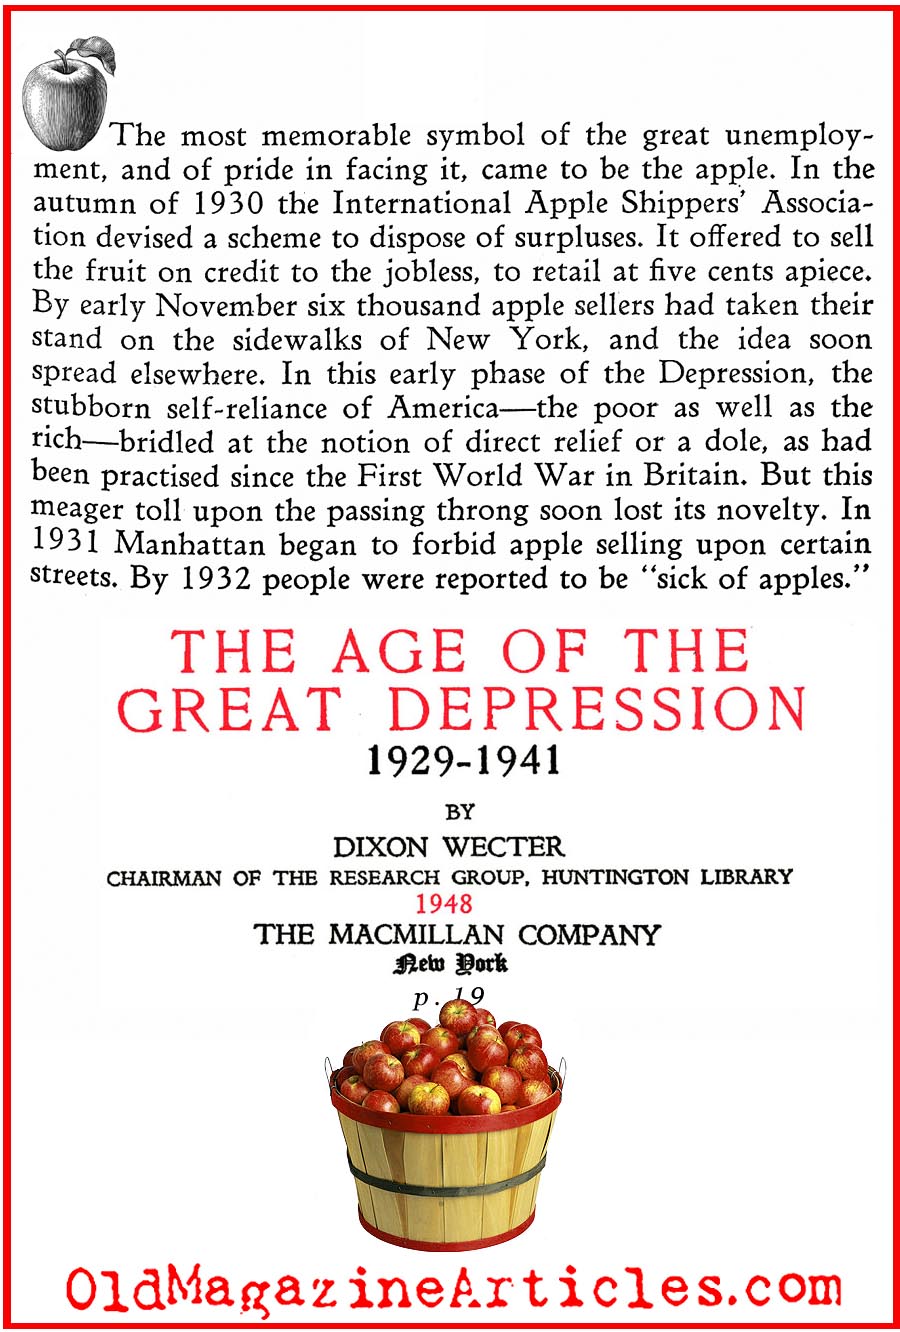 Why All The Sidewalk Apple Vendors?<BR> (The Age of the Great Depression, 1948)